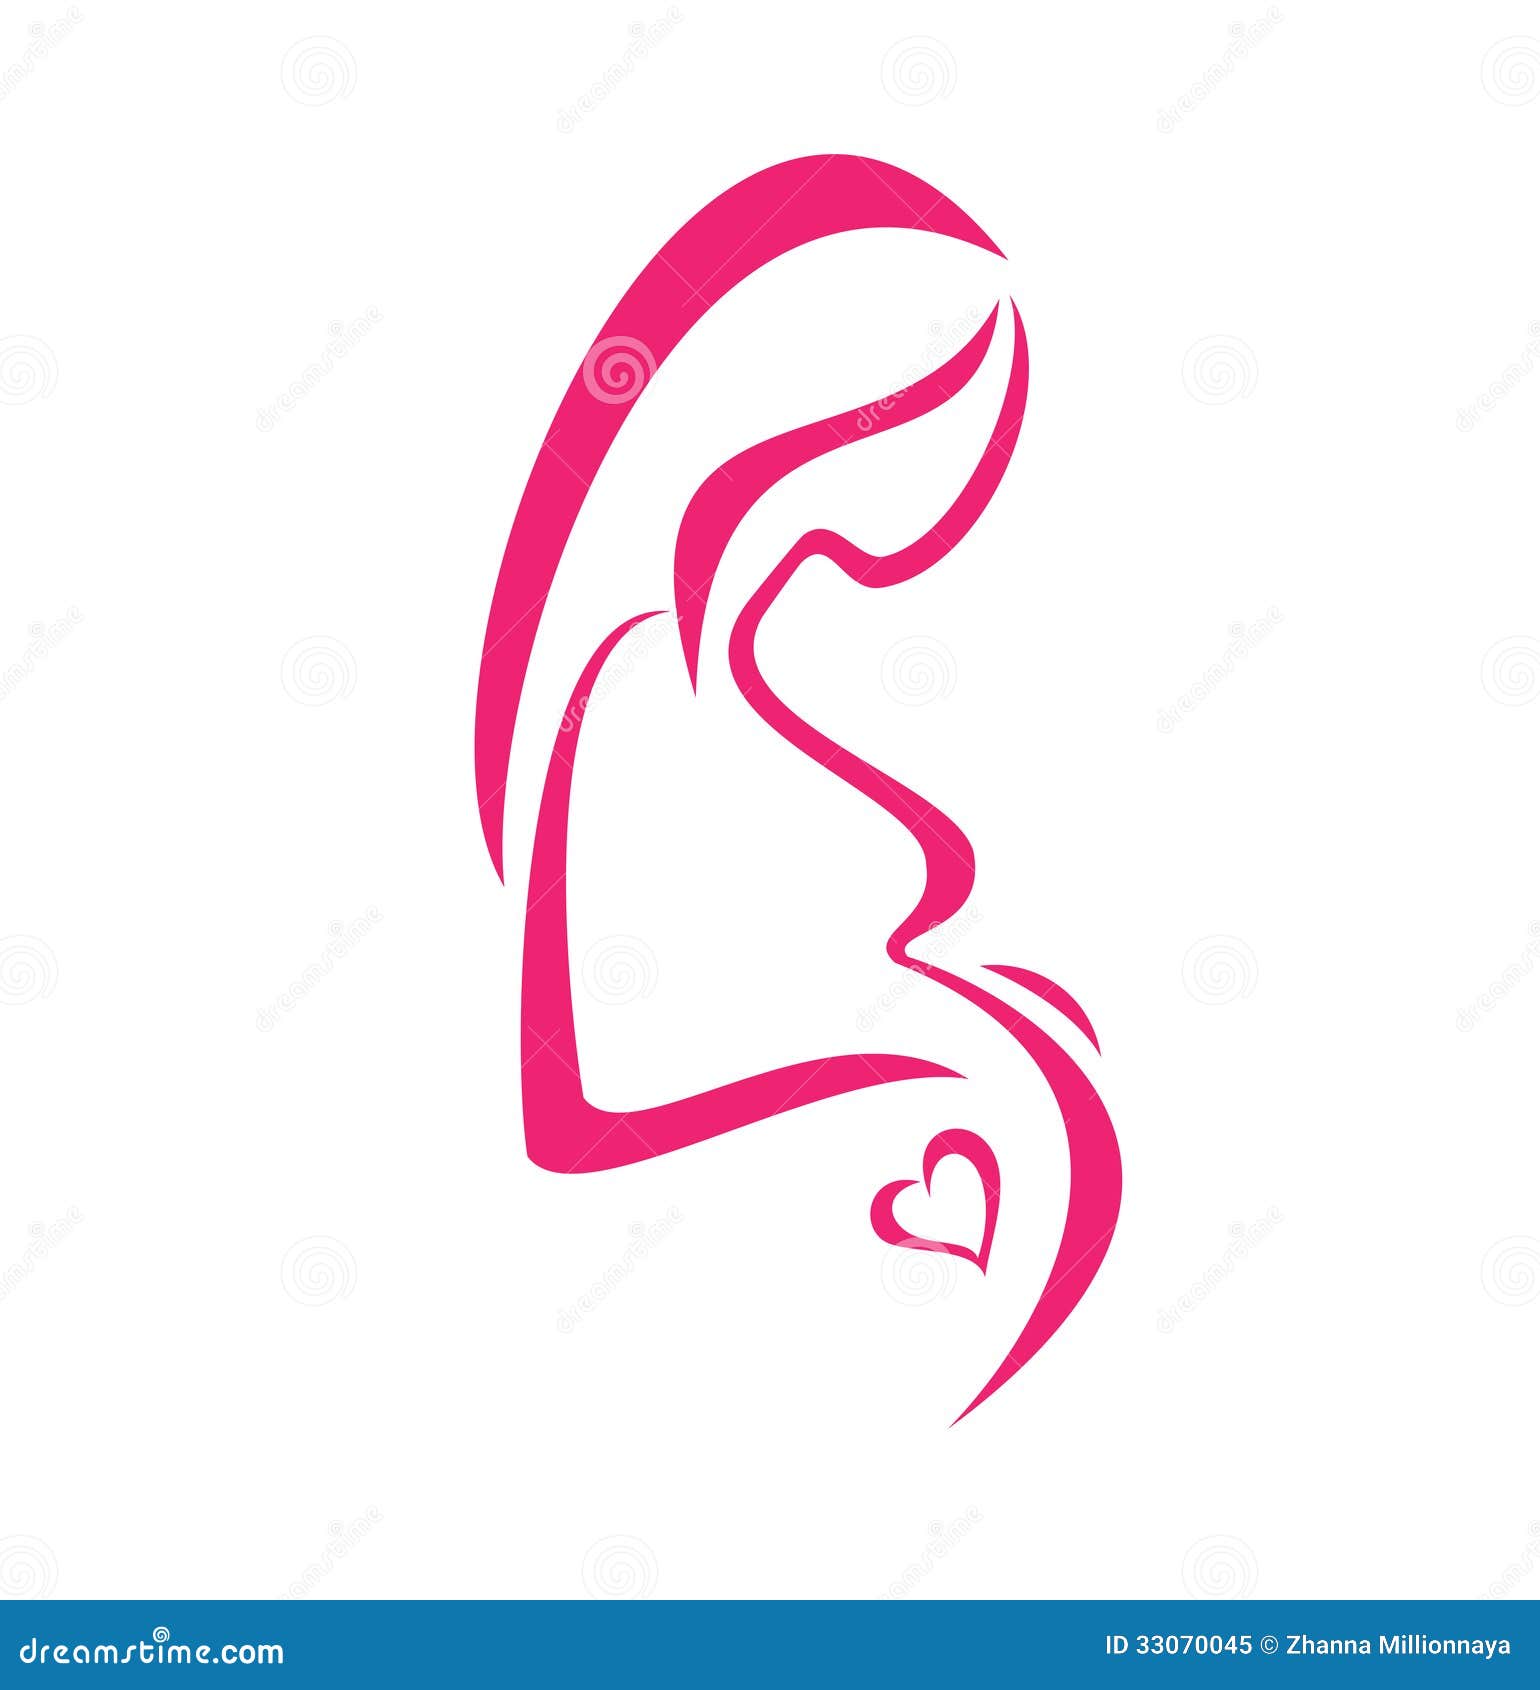 pregnant woman clipart baby shower free - photo #48